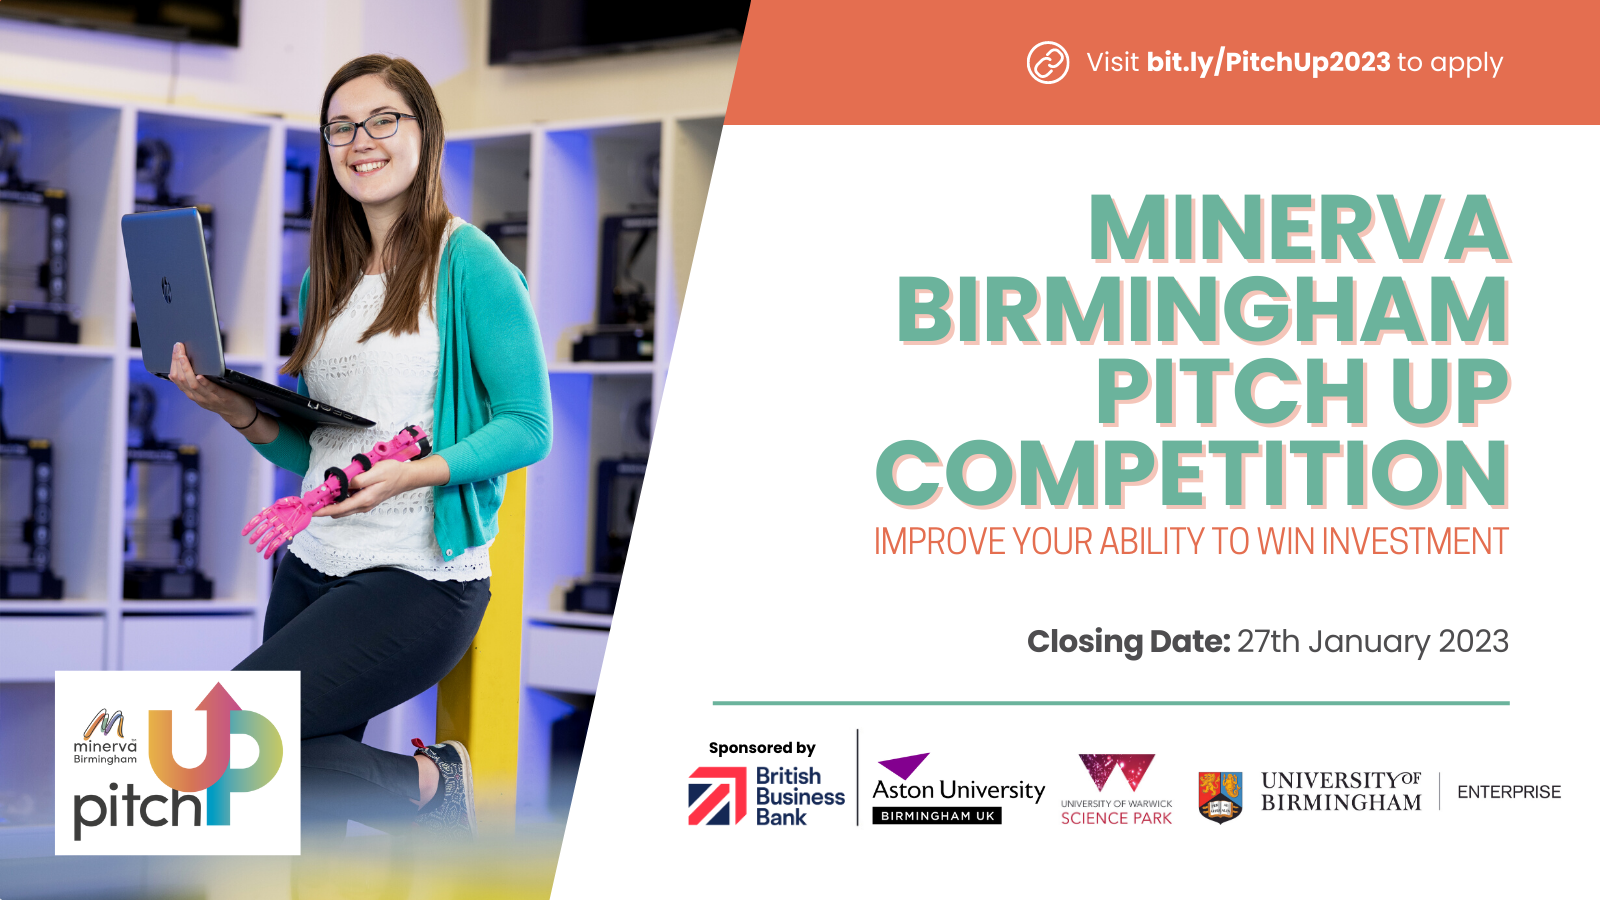 Minerva Birmingham Pitch Up is OPEN for applications!